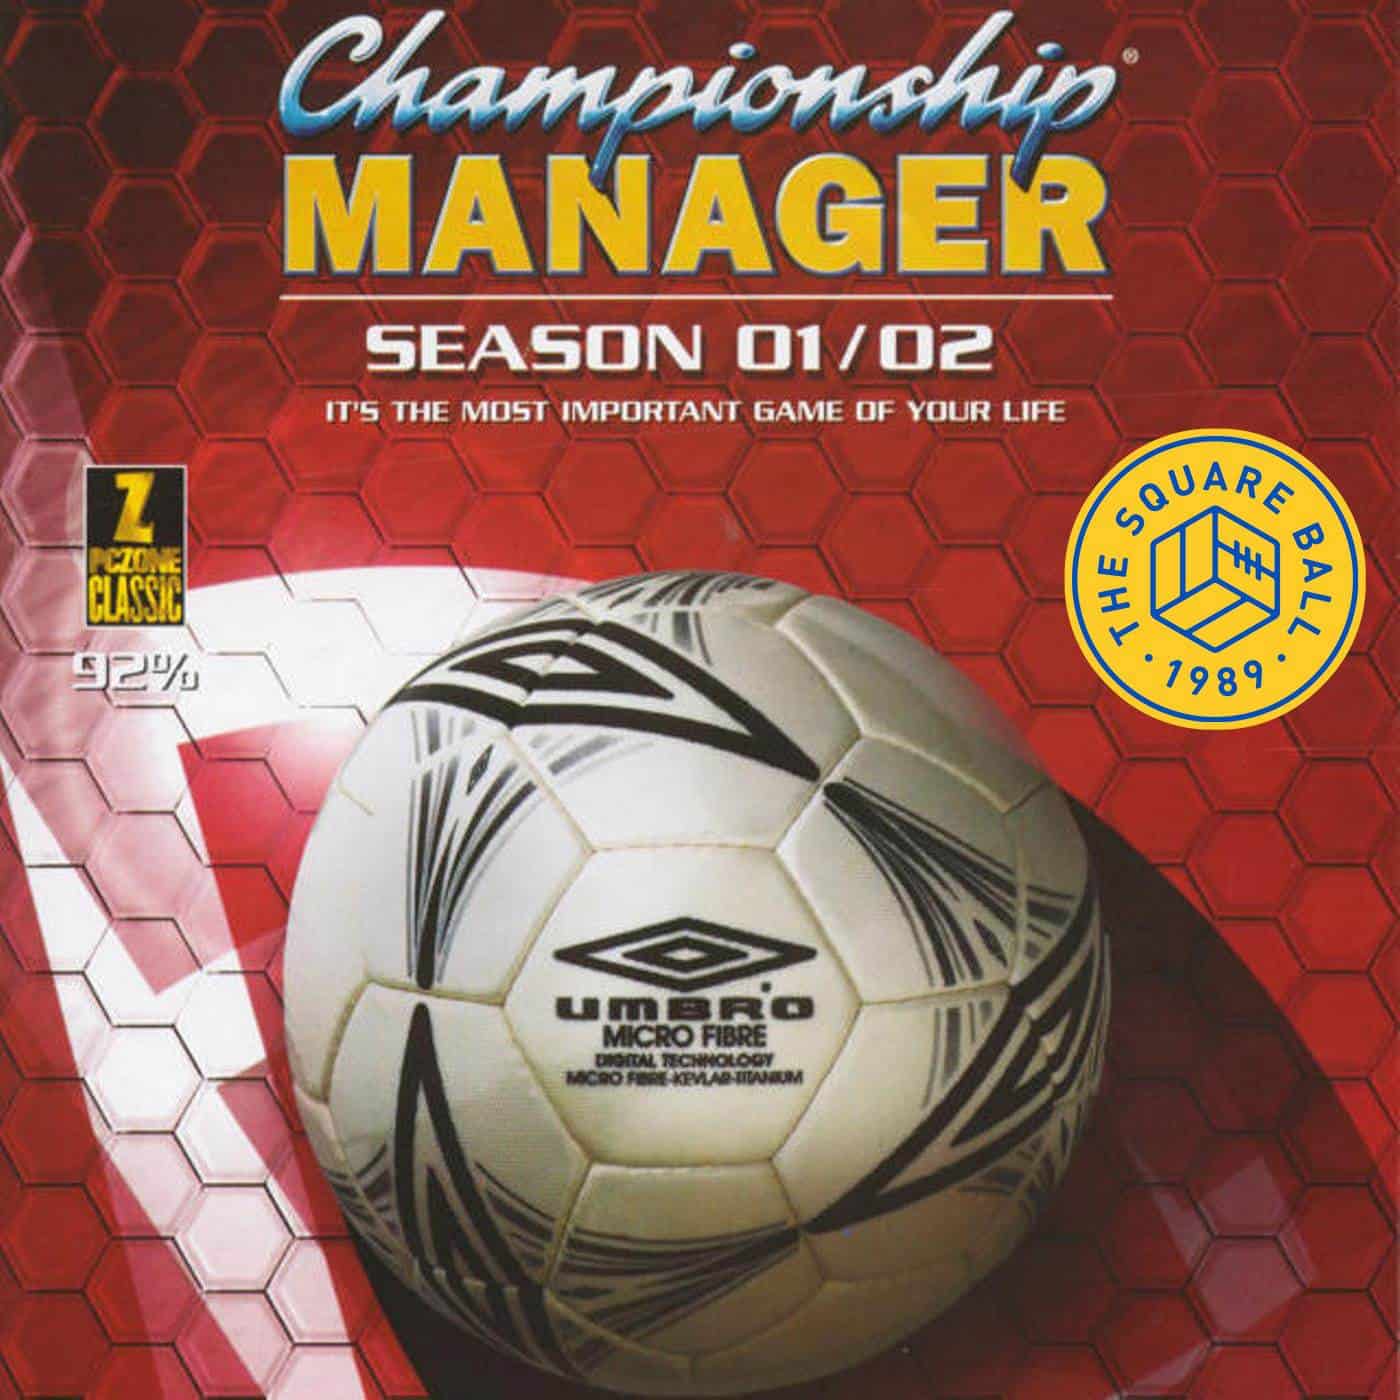 Championship Manager 01 02 on the App Store